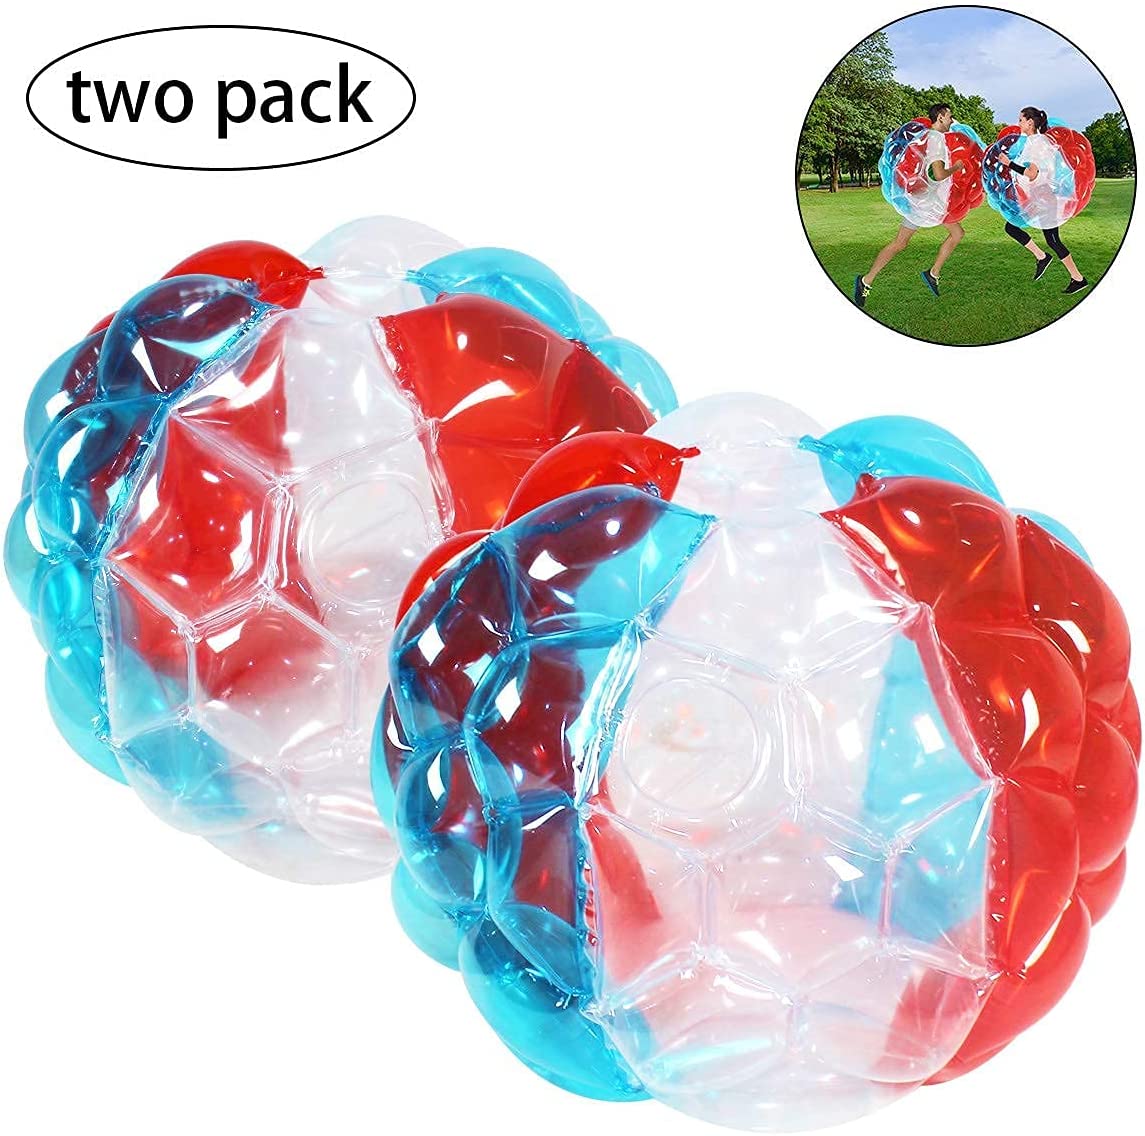 Two red, blue and white wearable inflatable bubble balls with an insert picture of two adults wearing the bubble balls outdoors.